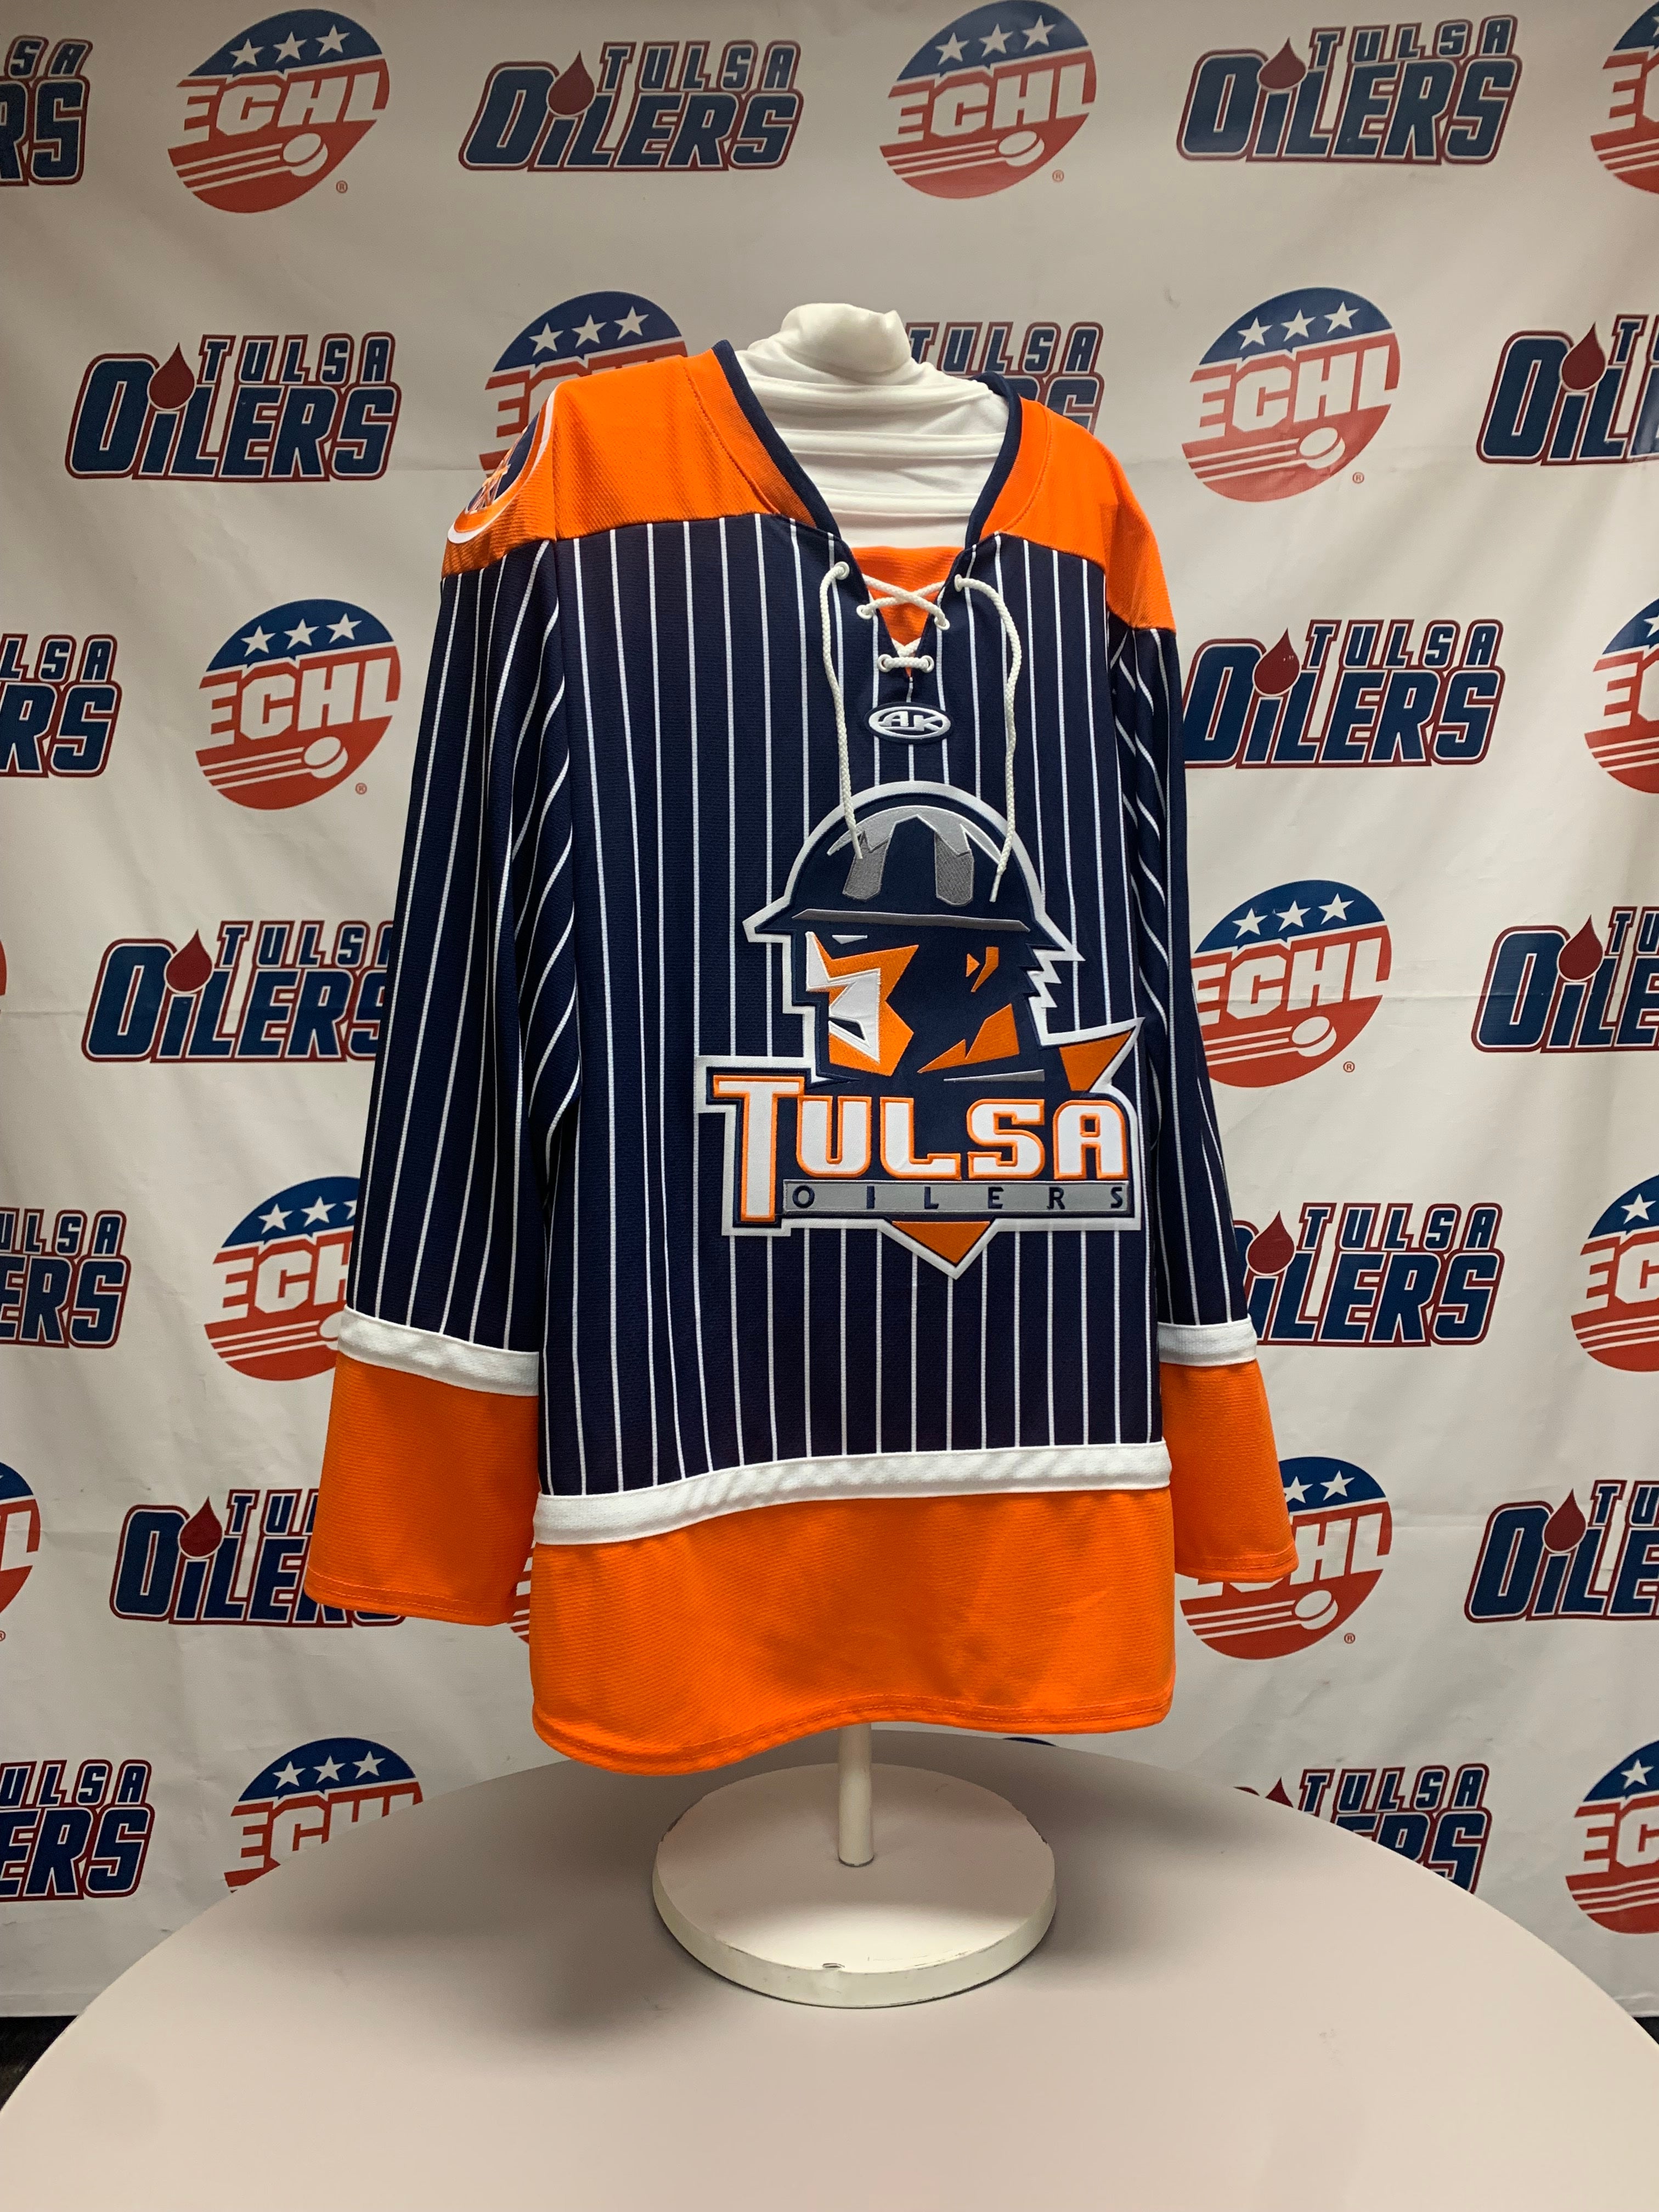 different oilers jerseys